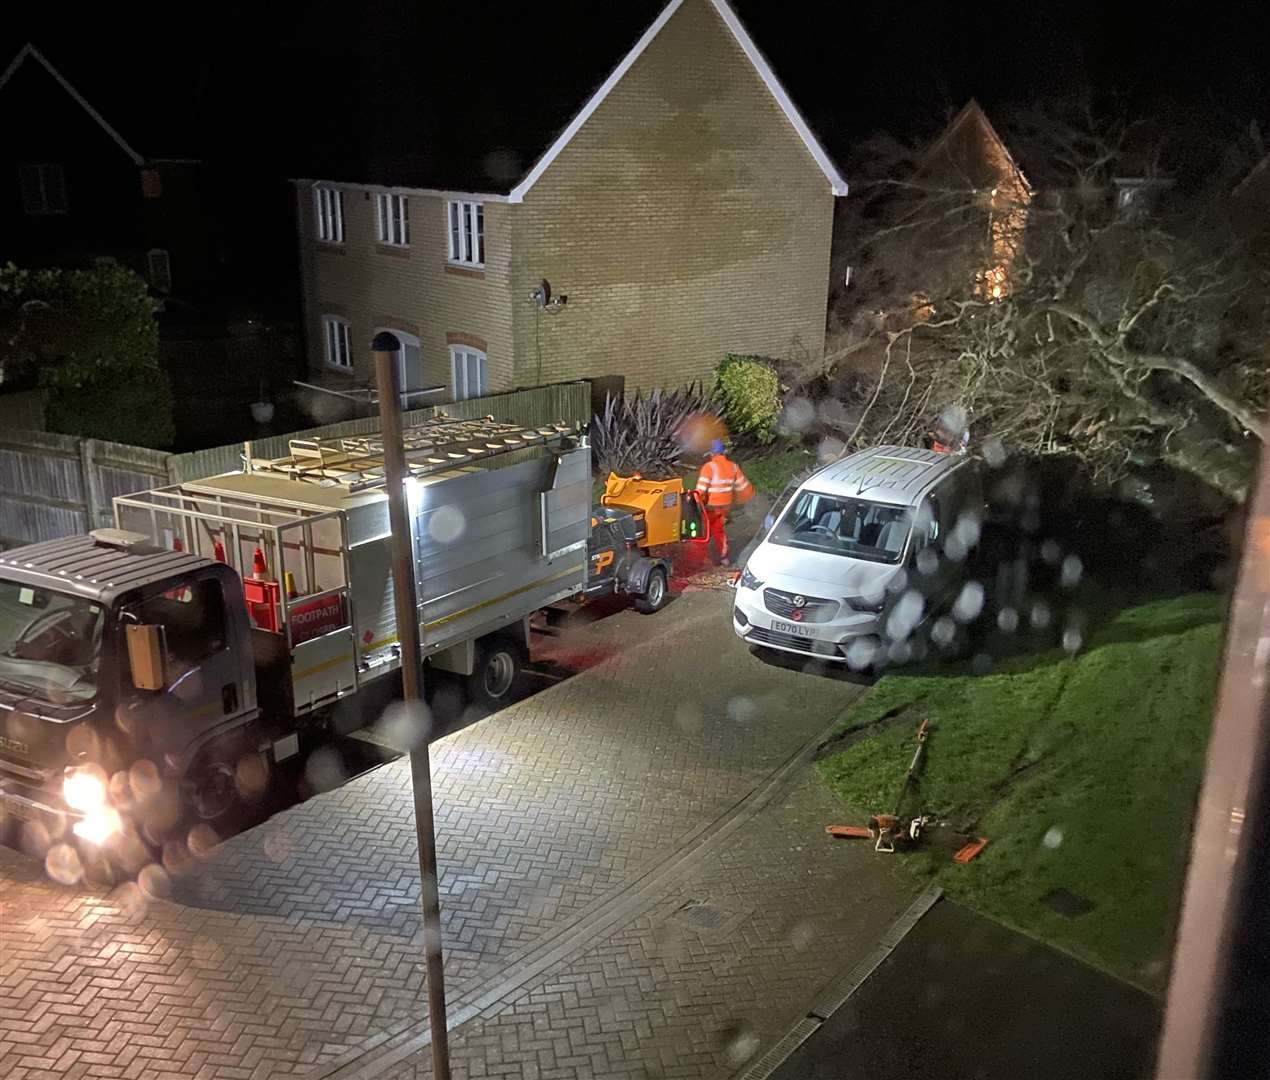 Council workers were at the scene in the early hours. Photo: Stella Twomey